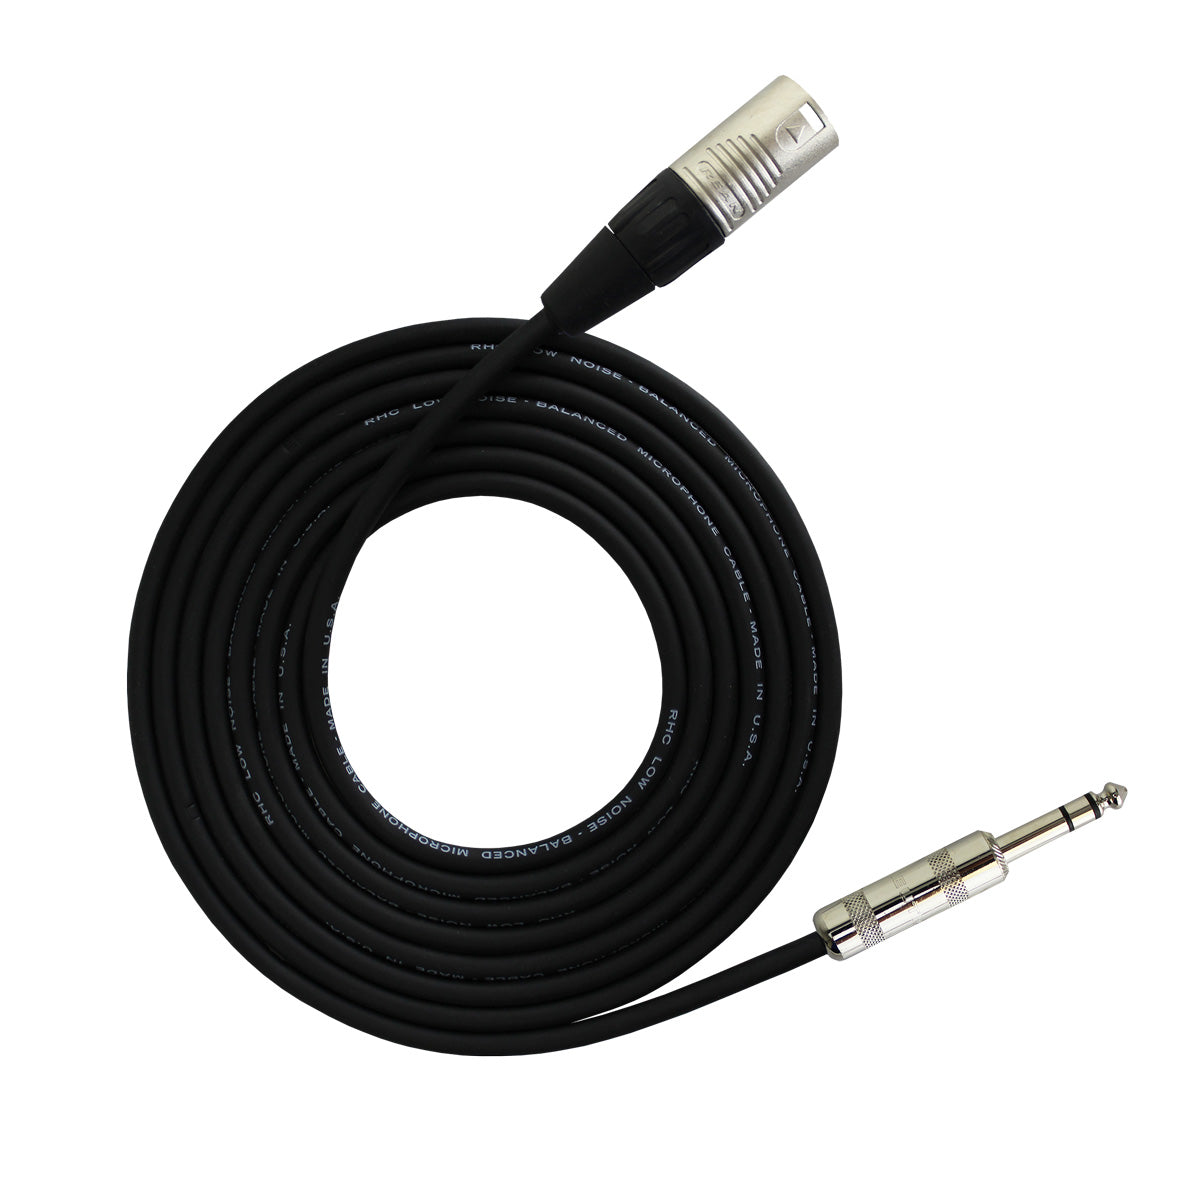 ProFormance USA Balanced Line Cable, 1/4 in. to XLR - 20 ft.